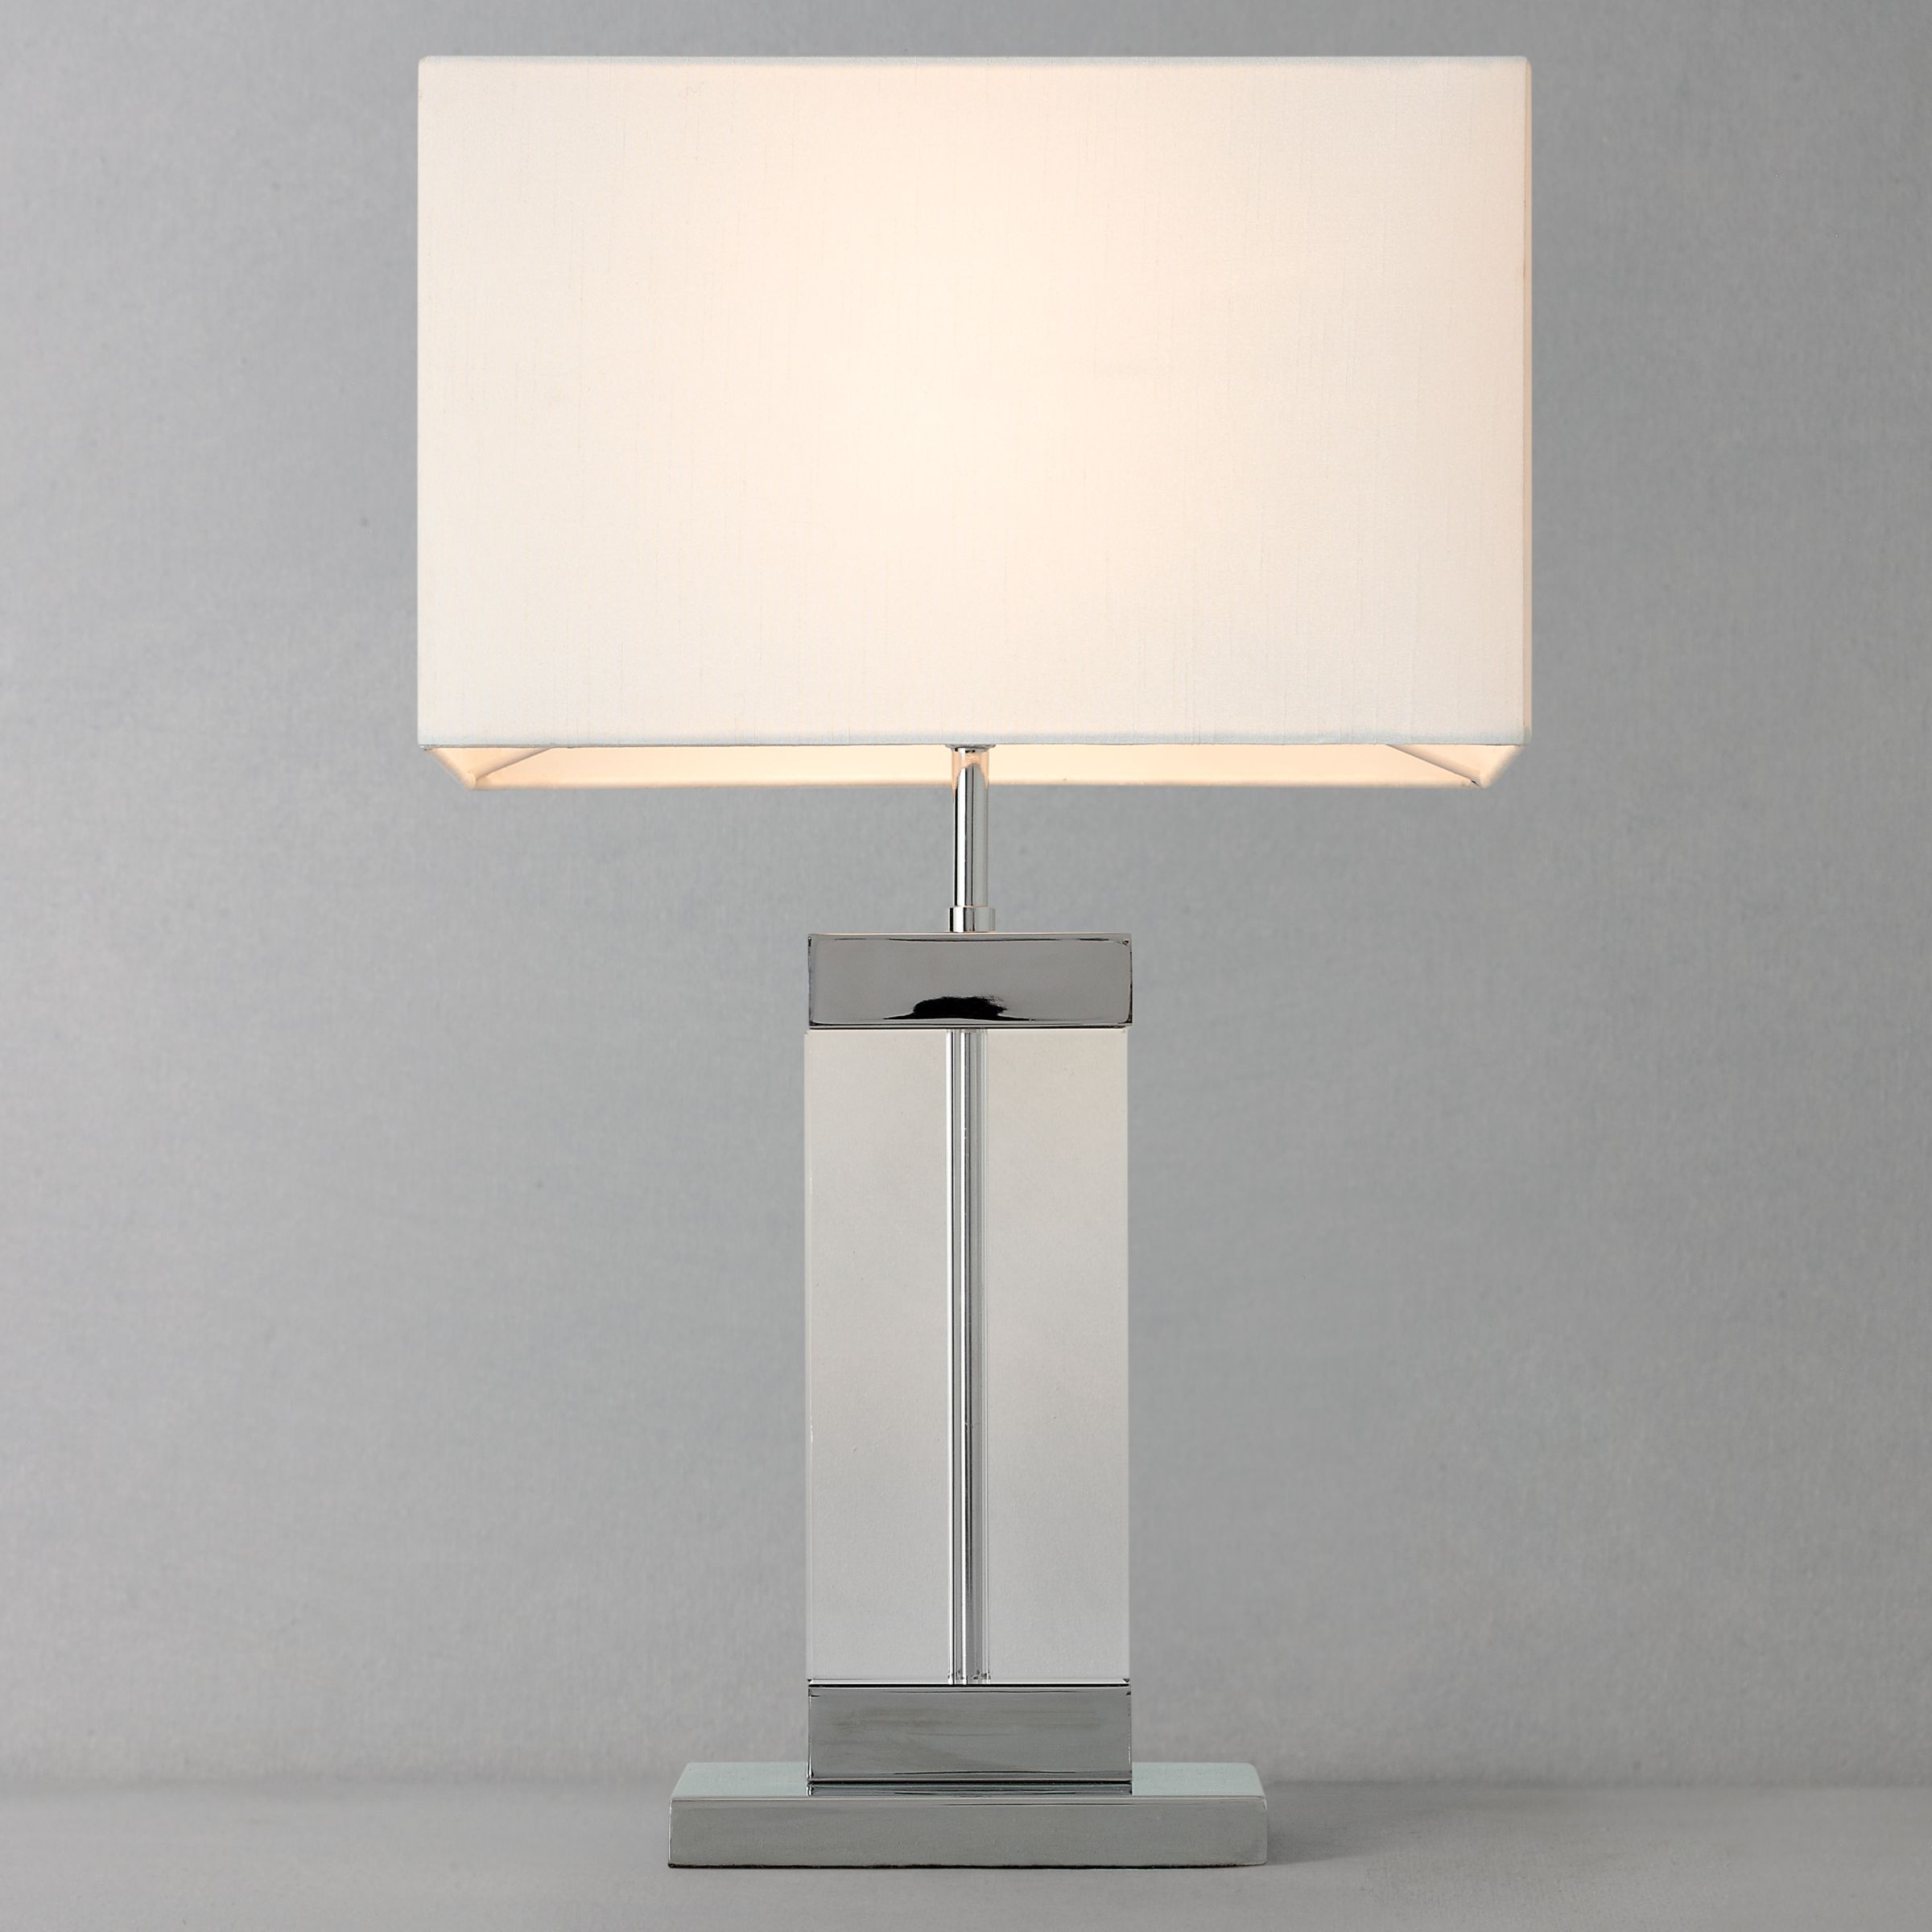 Photo of John lewis emilee glass table lamp